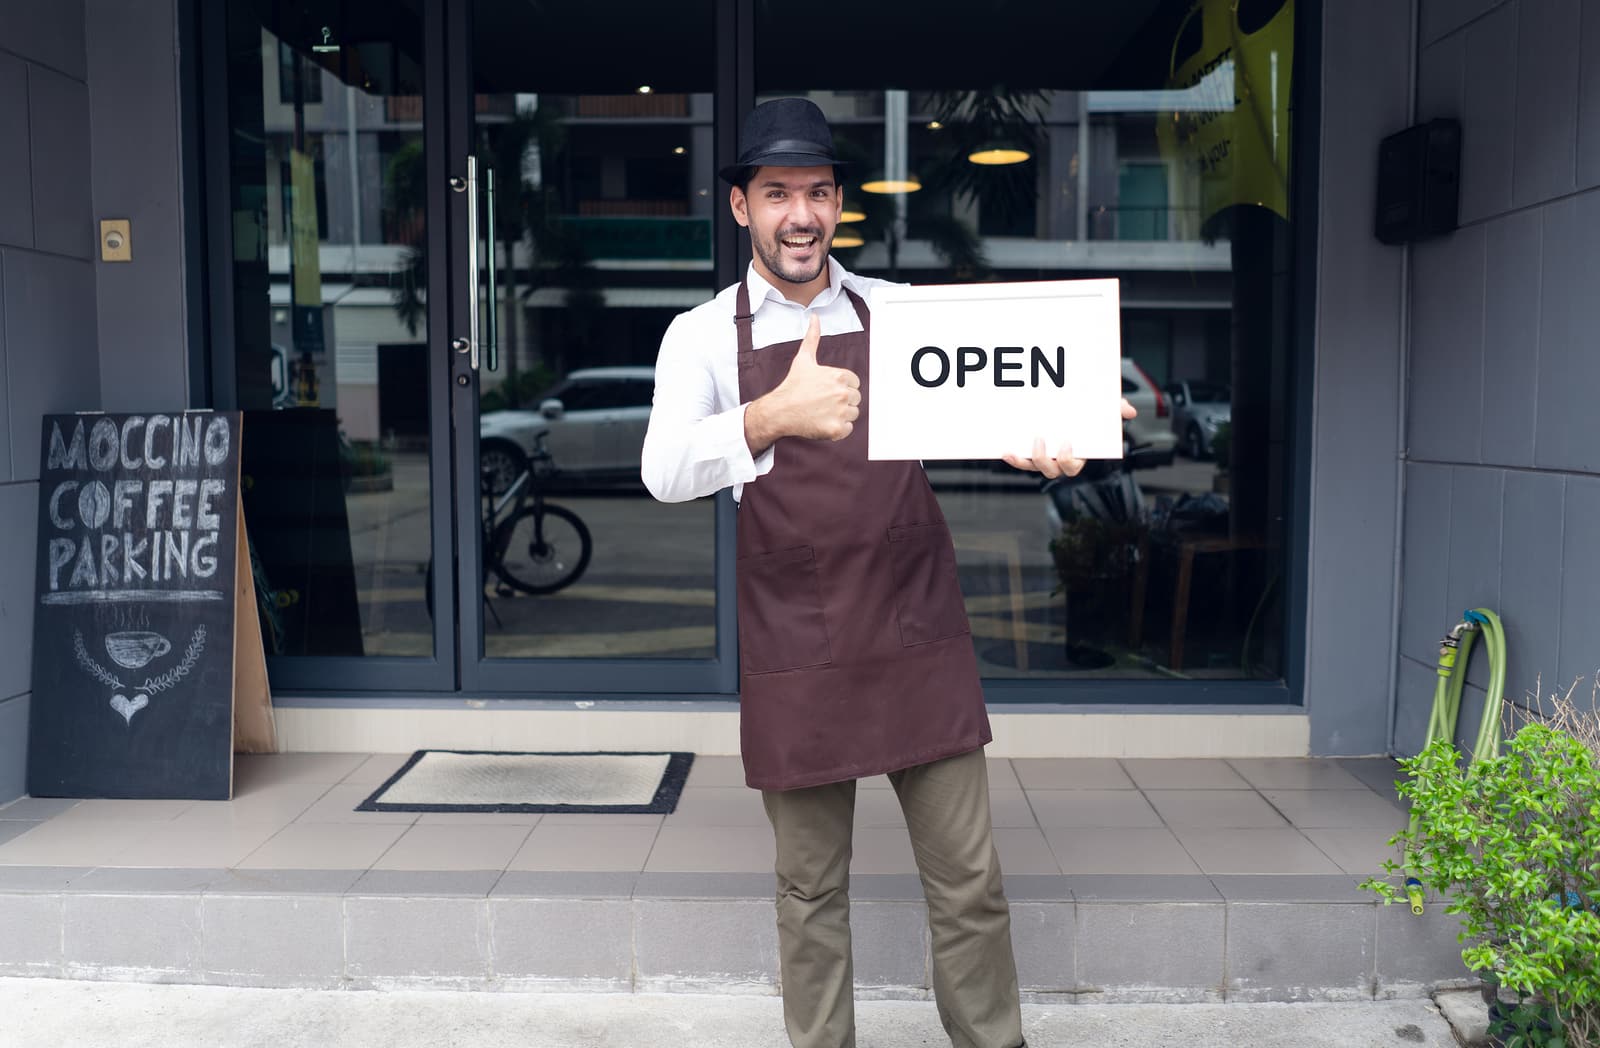 restaurant owner with OPEN sign